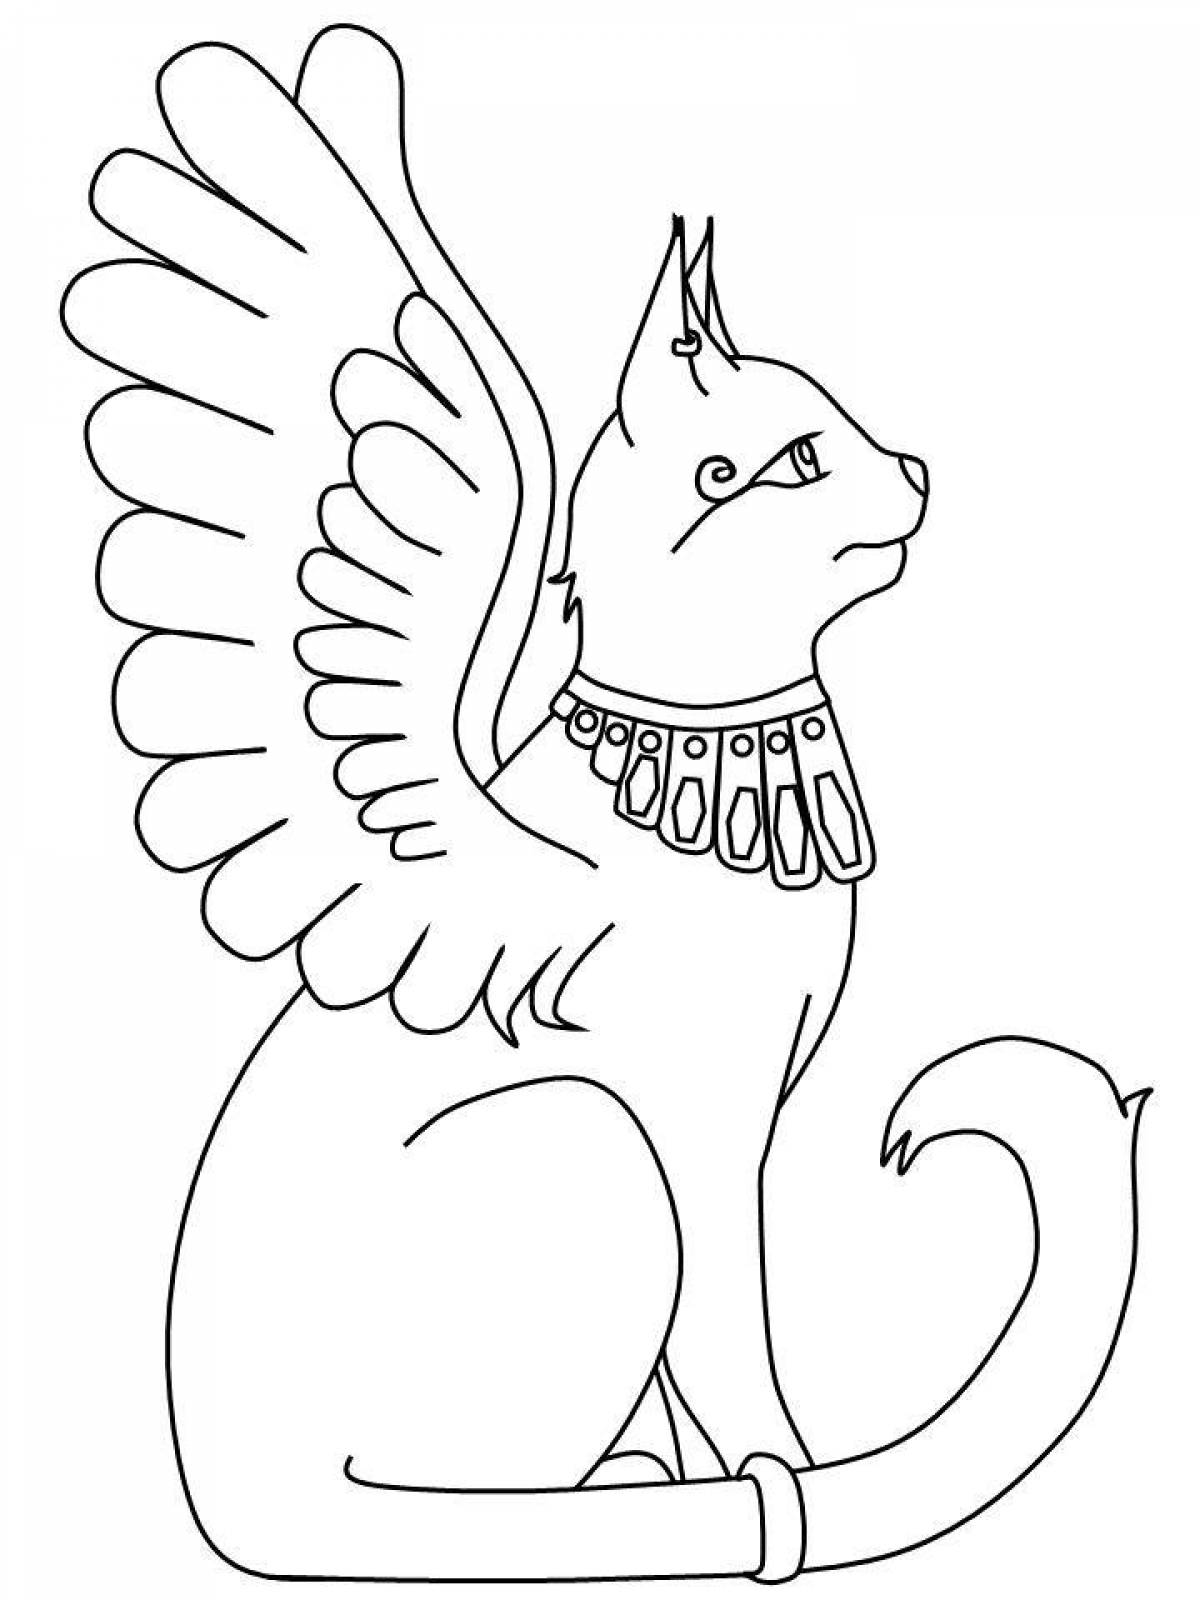 Great Egyptian cat coloring book